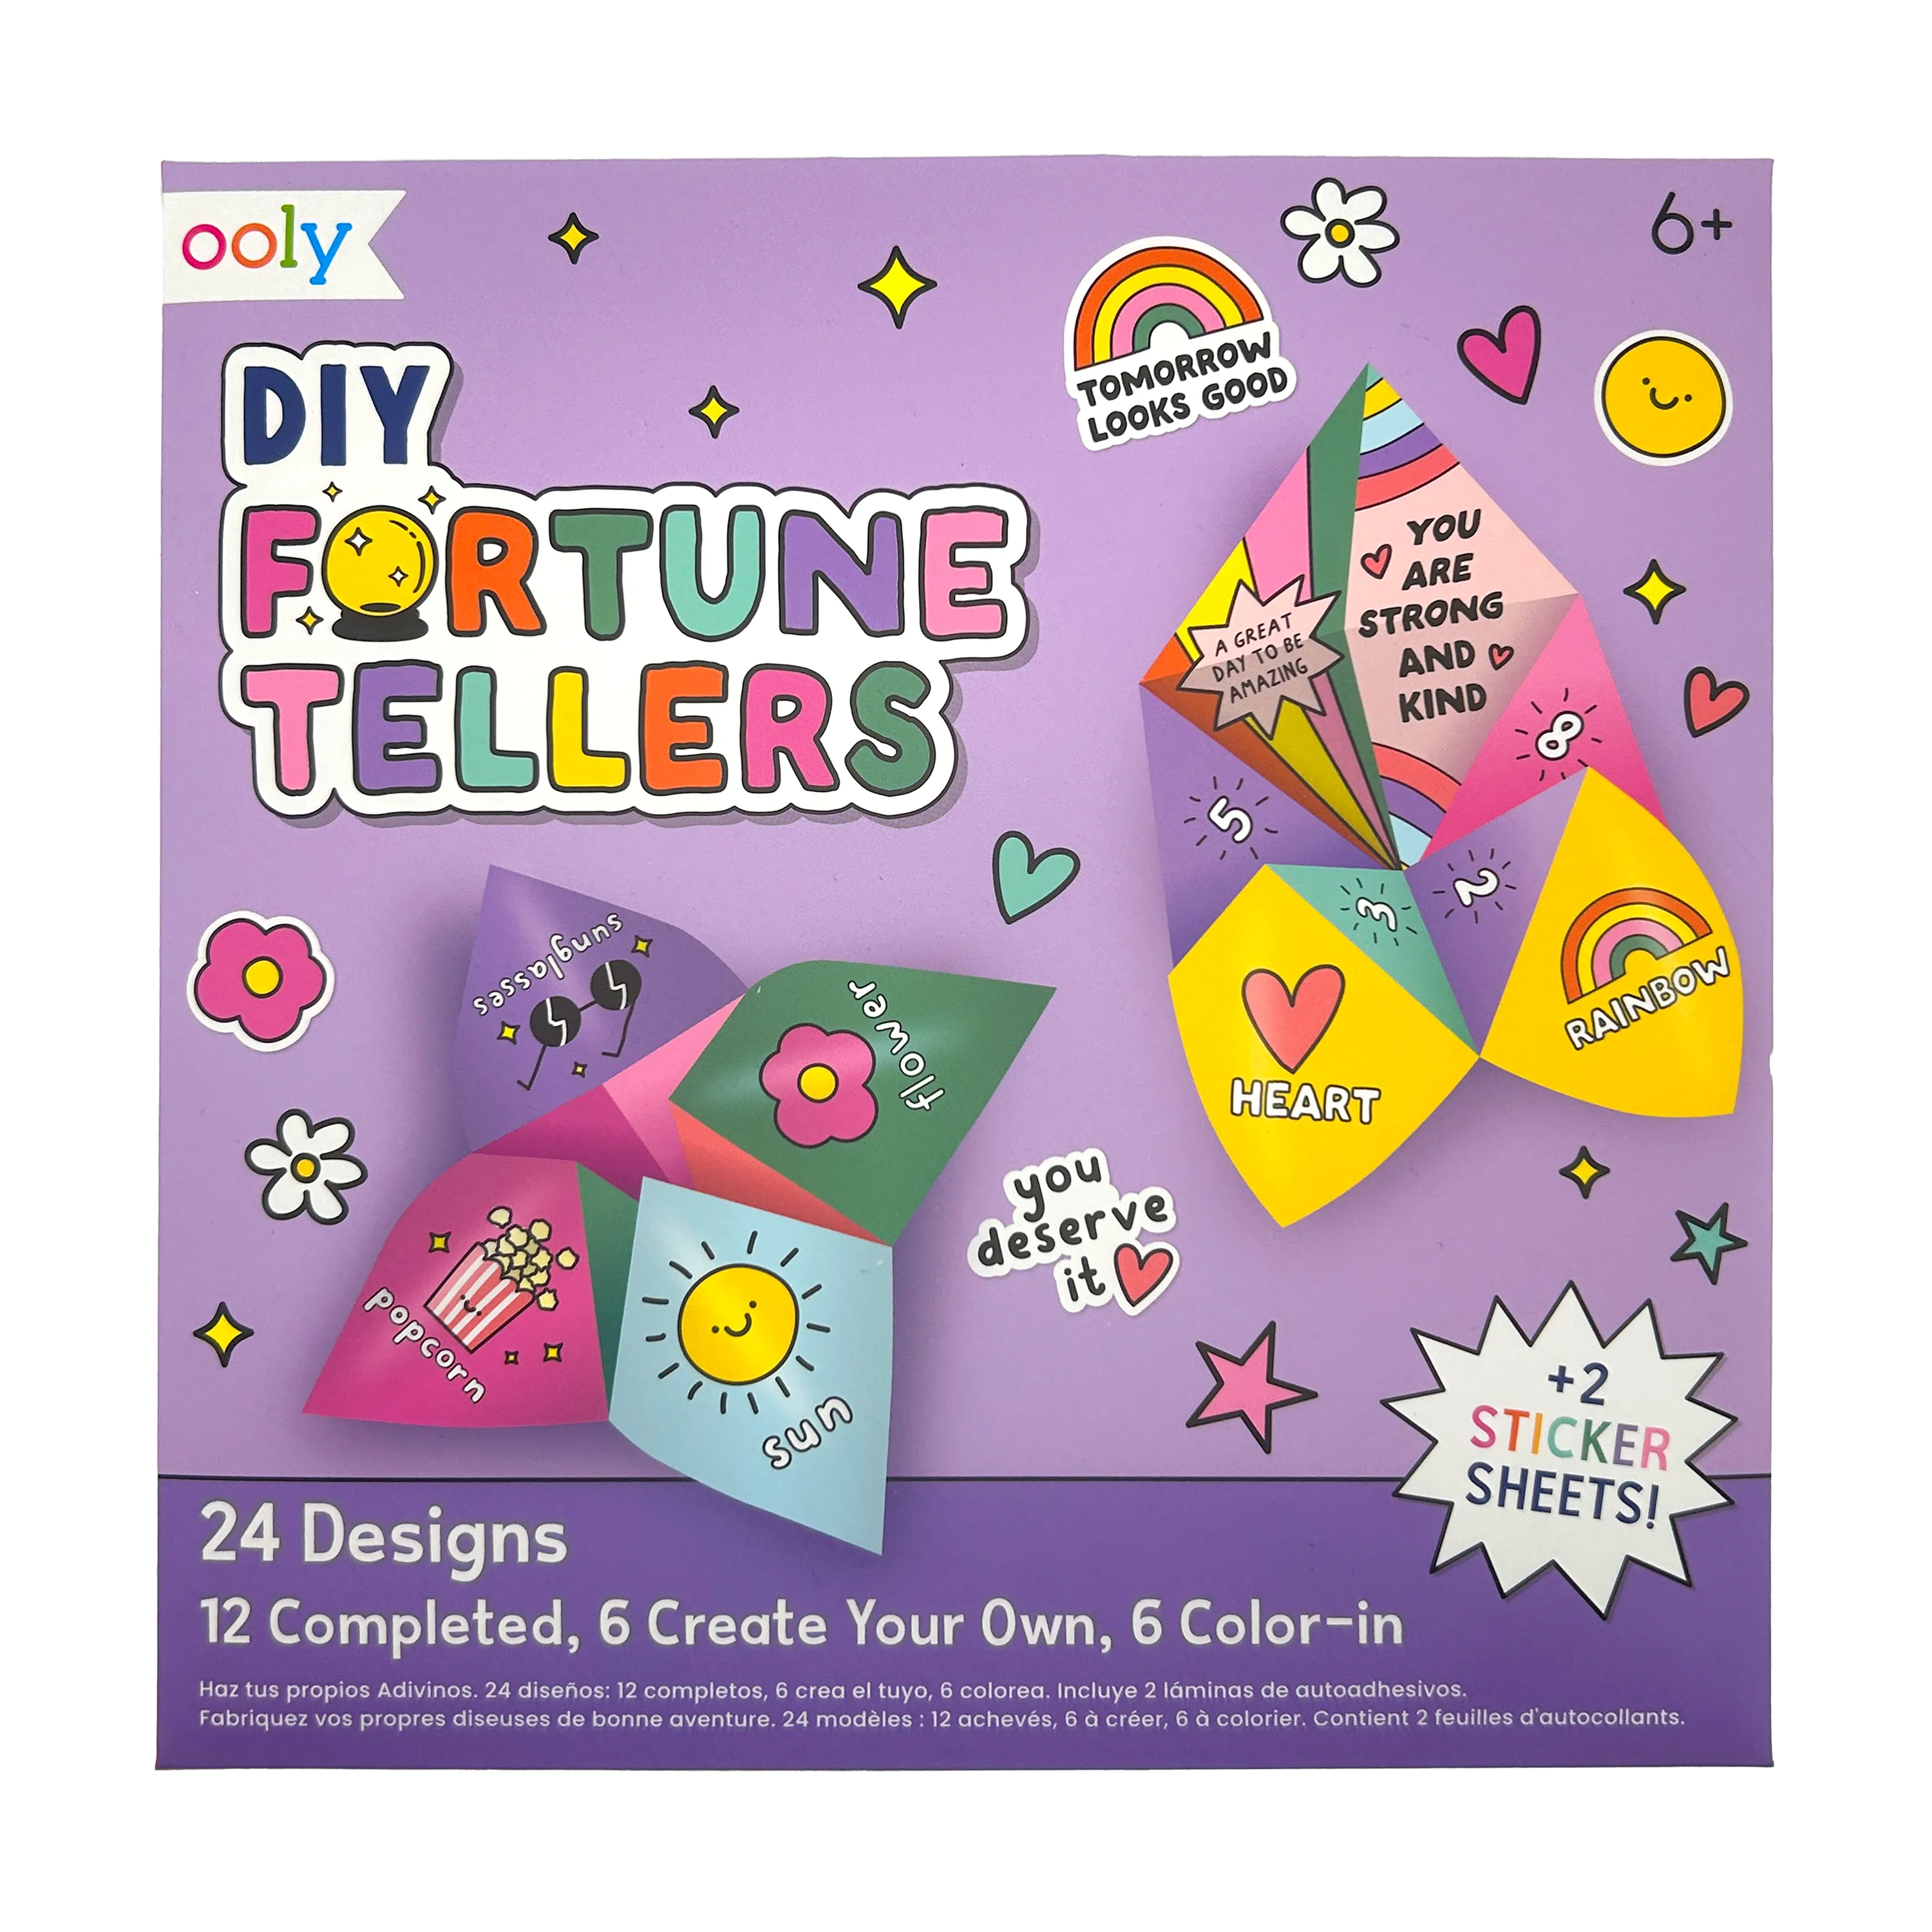 OOLY DIY Fortune Tellers Activity Kit back of packaging